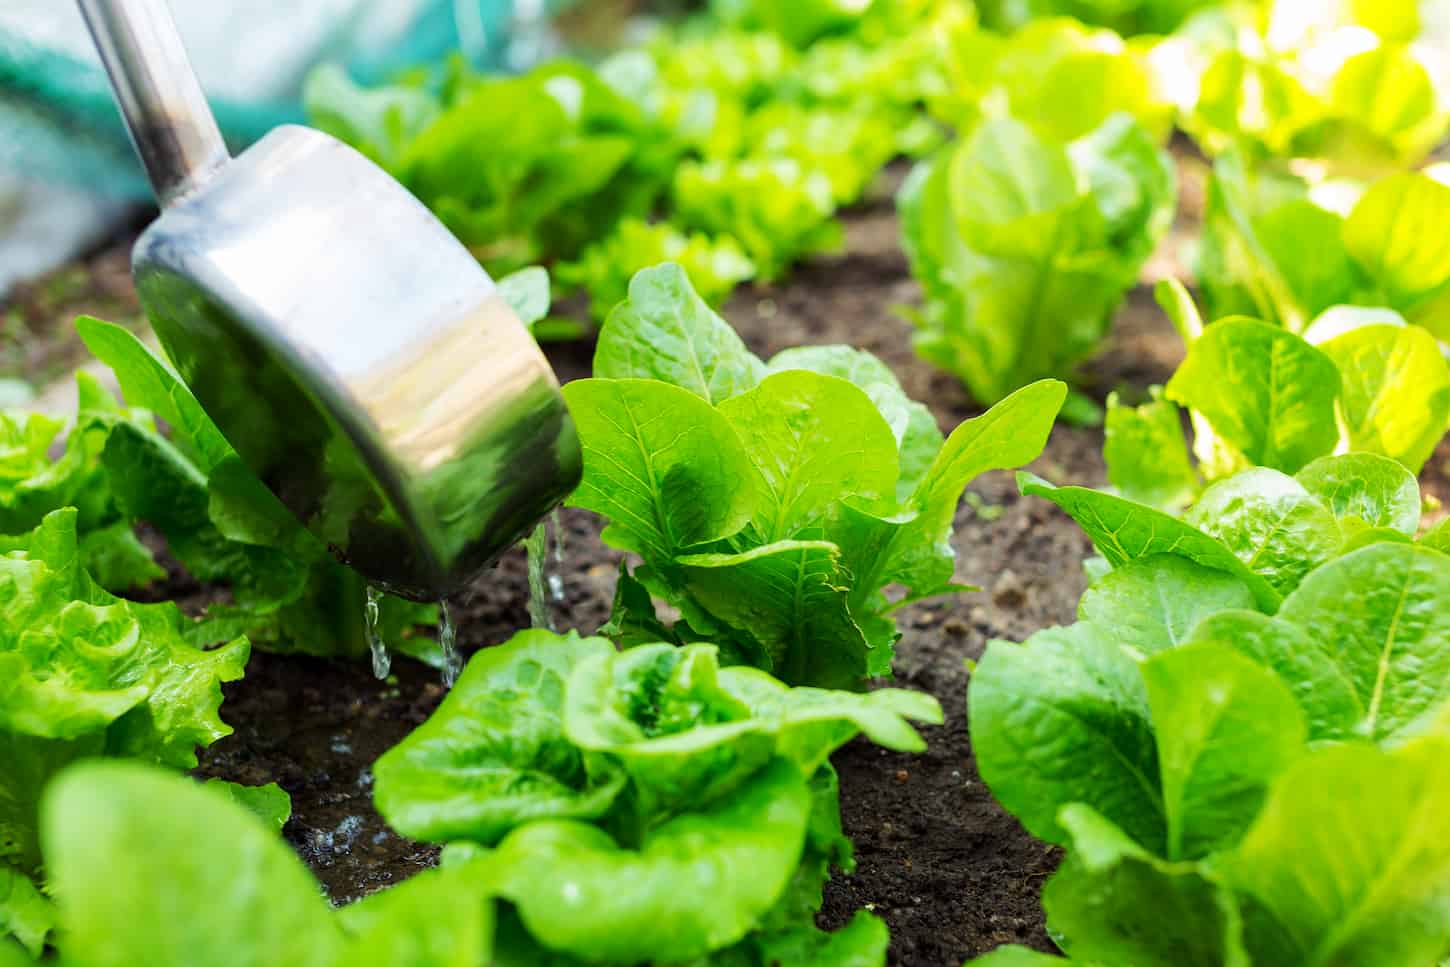 An image of fertilizer pouring into lettuce plants in a vegetable row.